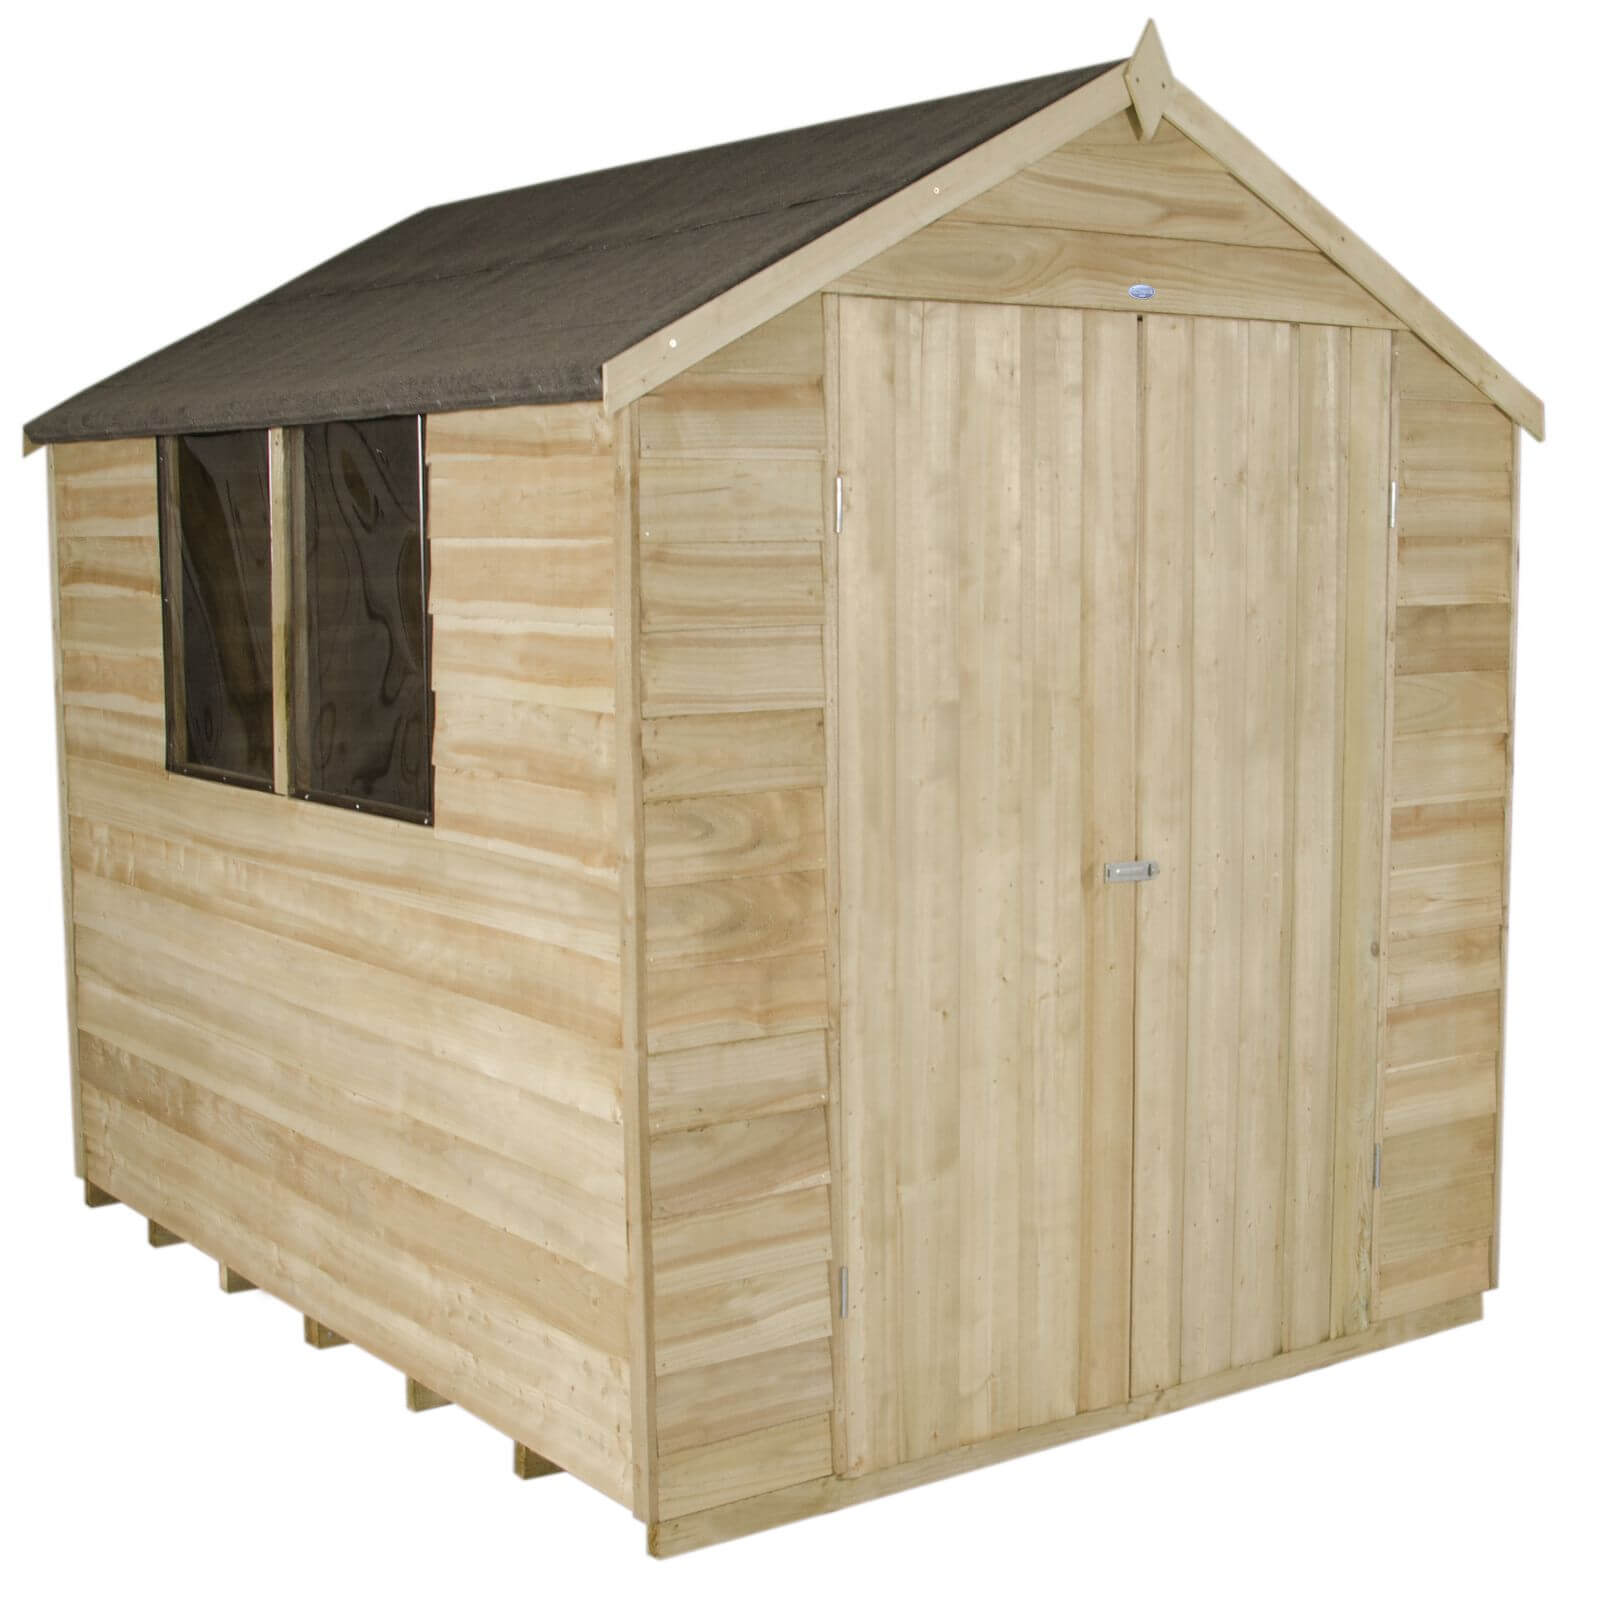 Forest Overlap 8 x 6ft Pressure Treated Apex Shed - Double Door